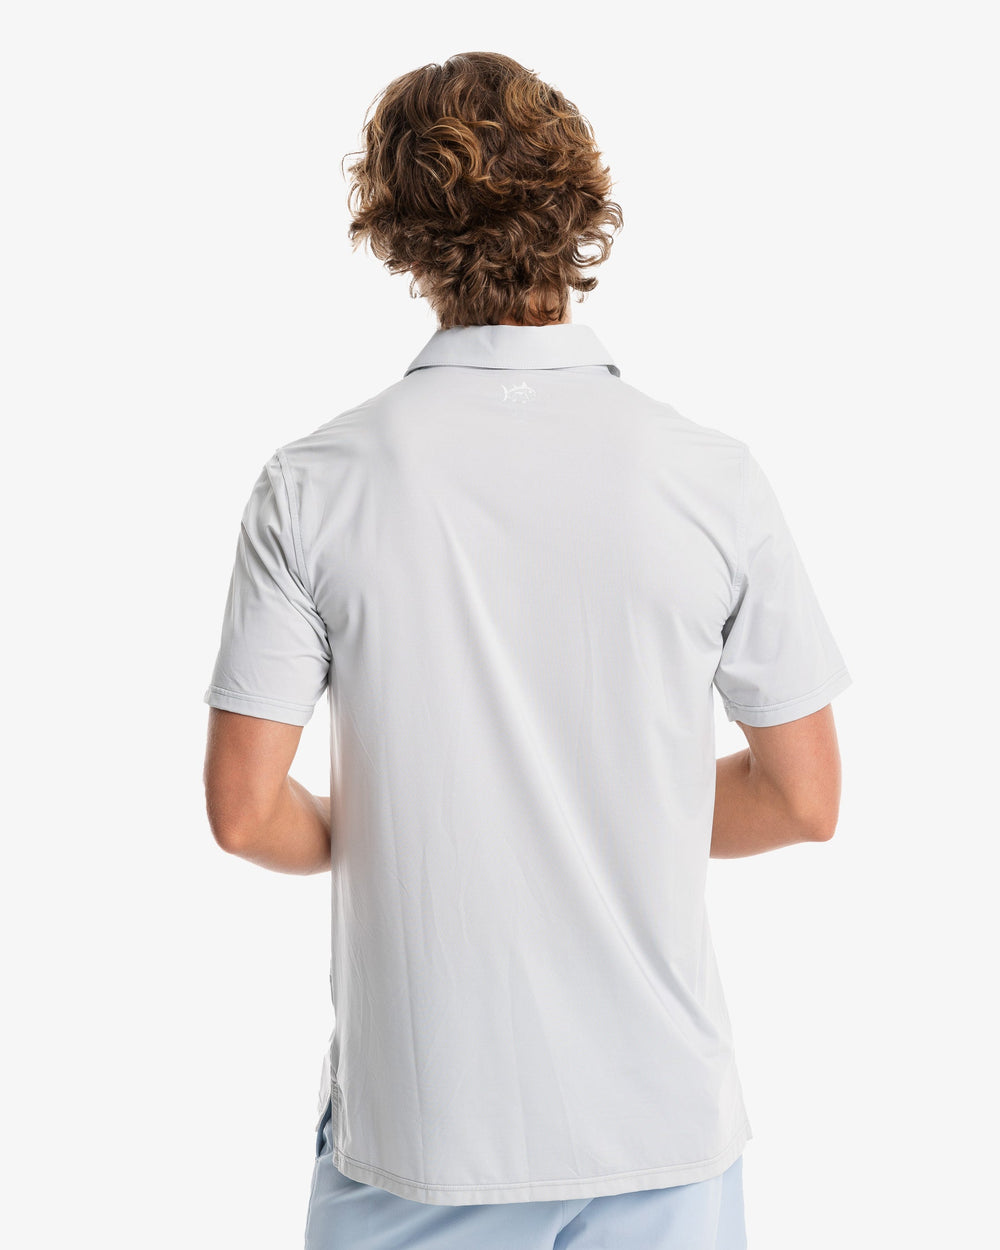 The model back view of the Men's Sawgrass Stripe brrr°®-eeze Performance Polo Shirt by Southern Tide - Seagull Grey